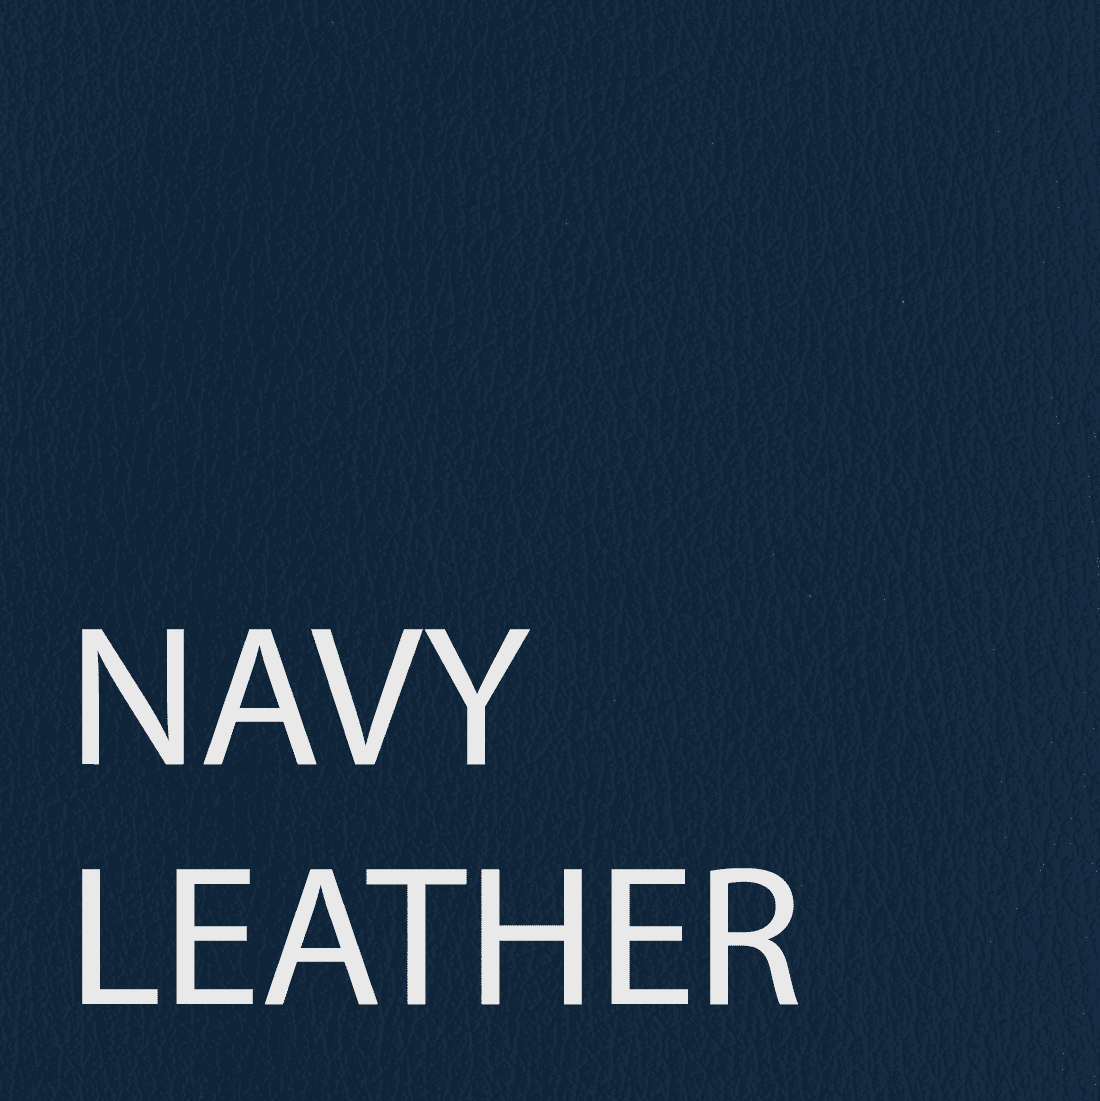 NAVY BLUE Instant MastaPlasta Leather Repair Patch, Self-Adhesive Premium Leather  Repair Patch for Upholstery. Large 8 x 4 in (20 x 10 cm). Sofa, Car Seat,  Bags. Pressed edge for neatest finish. 